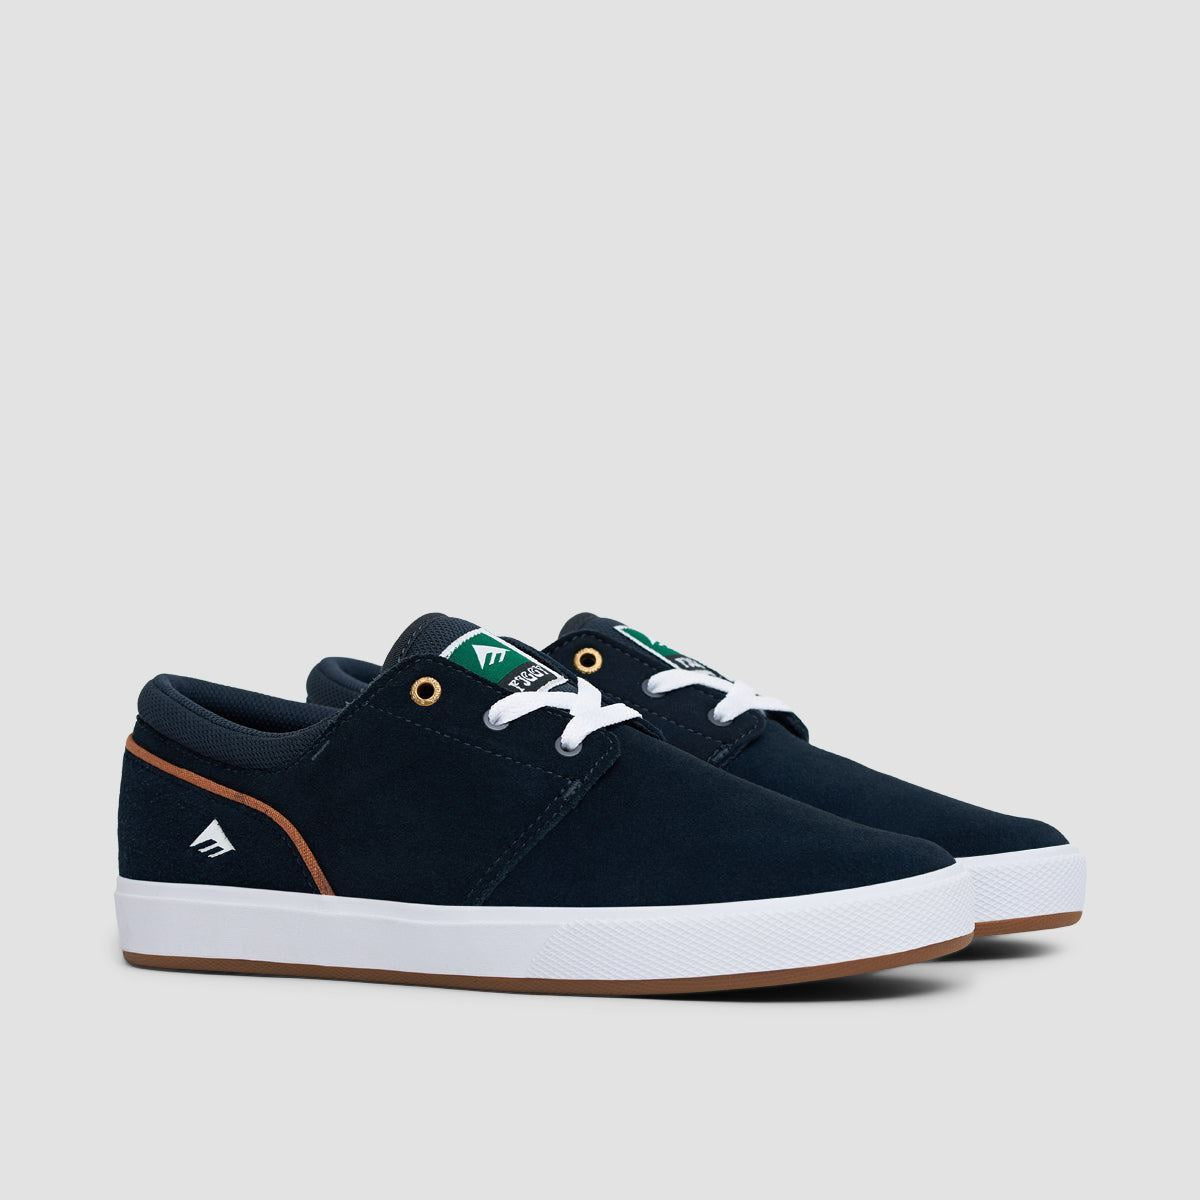 Emerica Figgy G6 Shoes - Navy